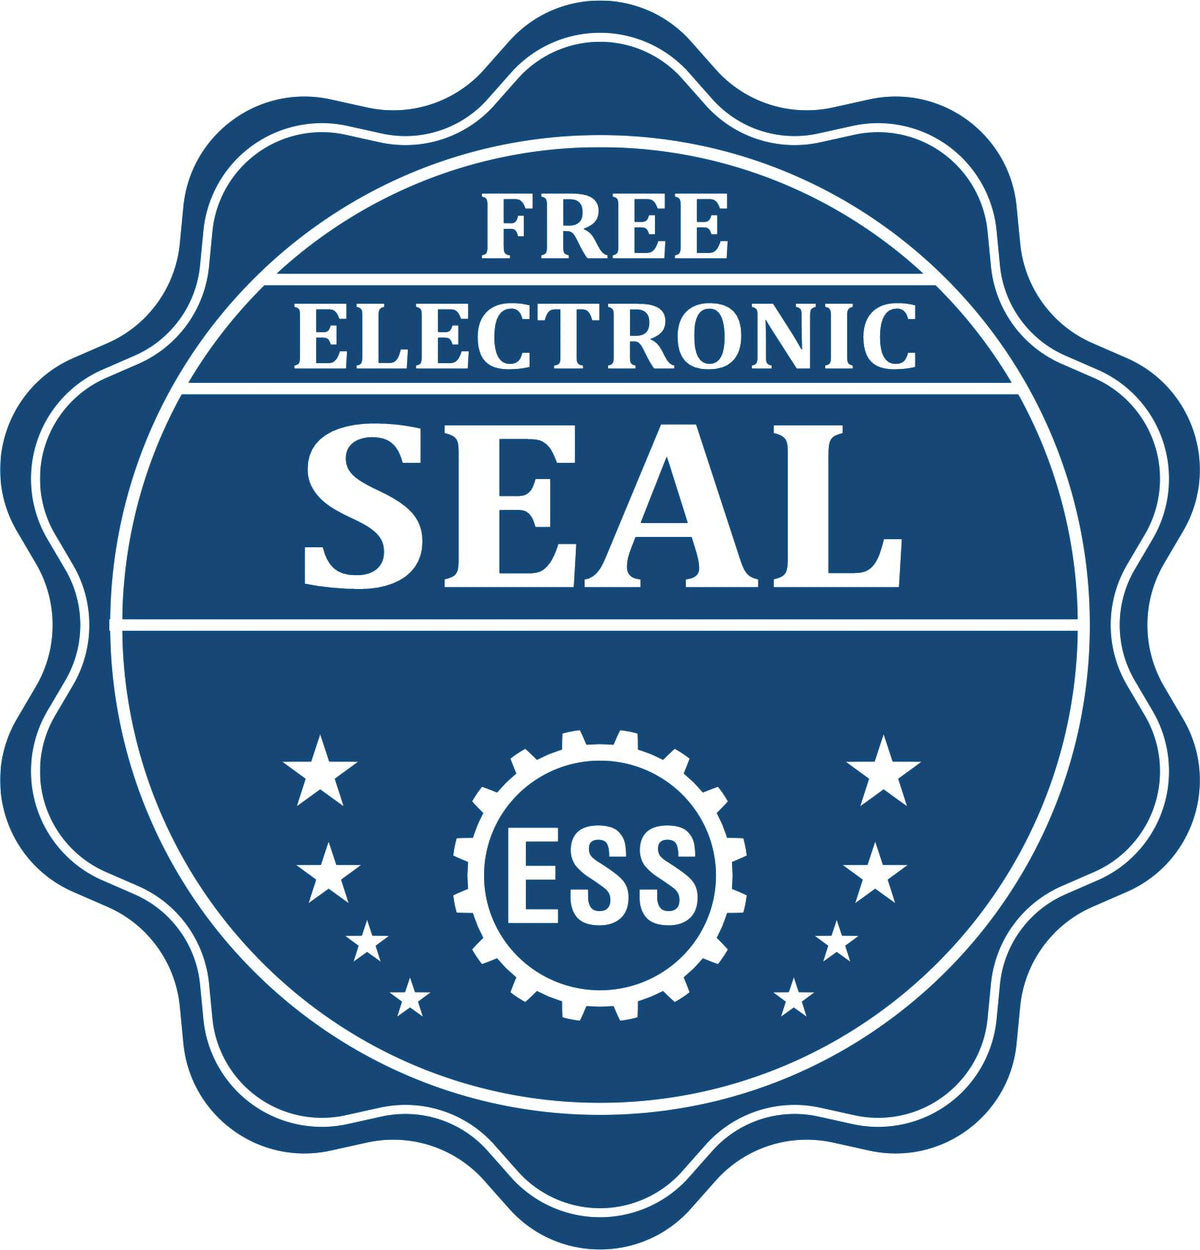 A badge showing a free electronic seal for the Soft Pennsylvania Professional Geologist Seal with stars and the ESS gear on the emblem.